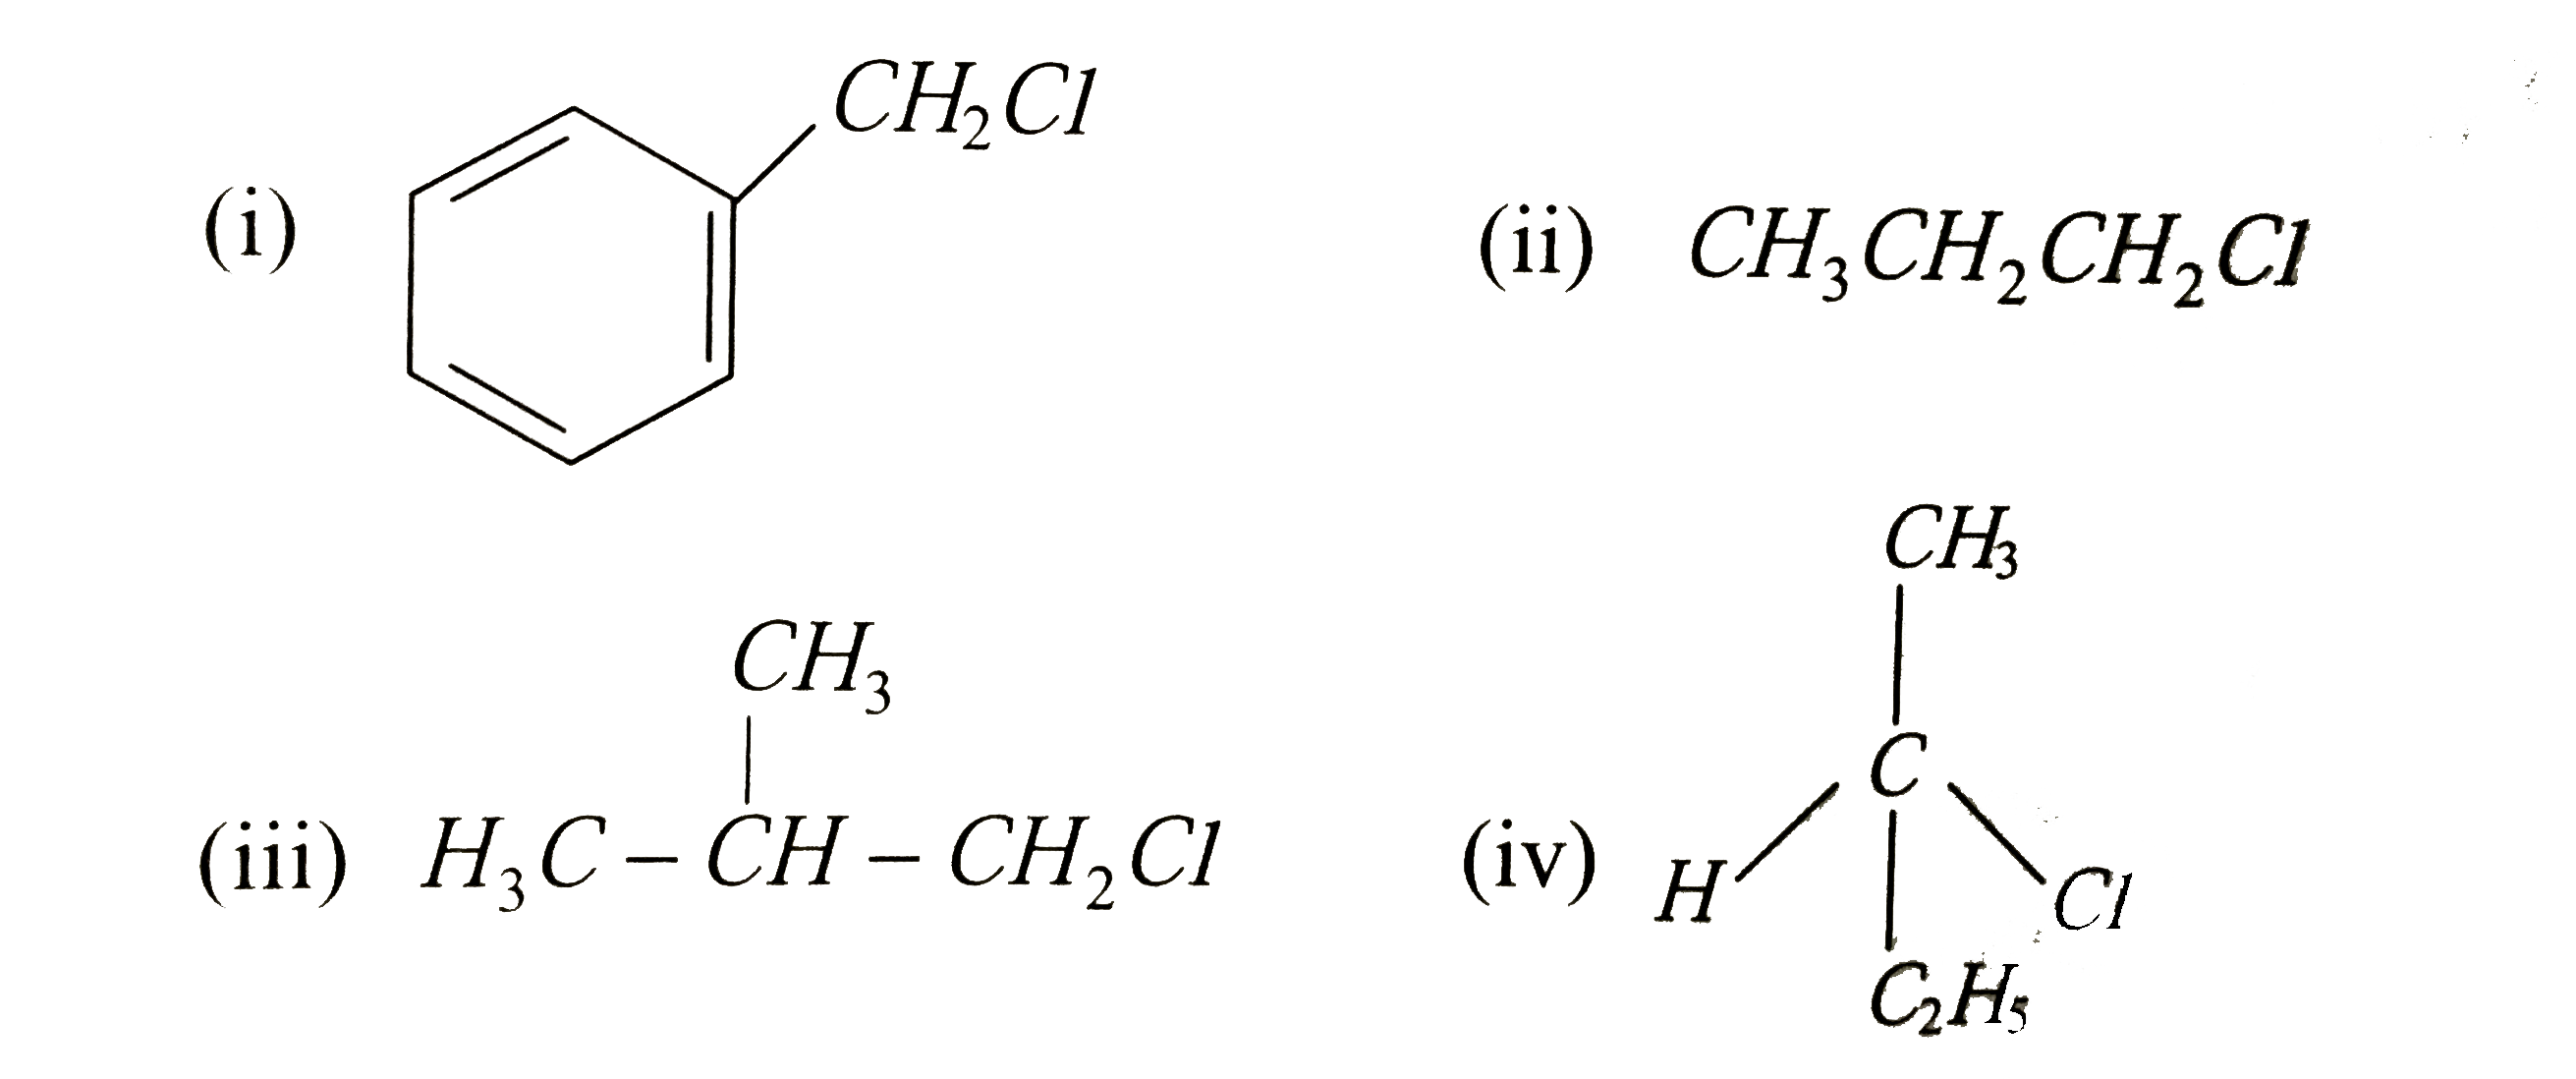 Which of the following compounds will undergo racemisation when solution of KOH hydrolyses